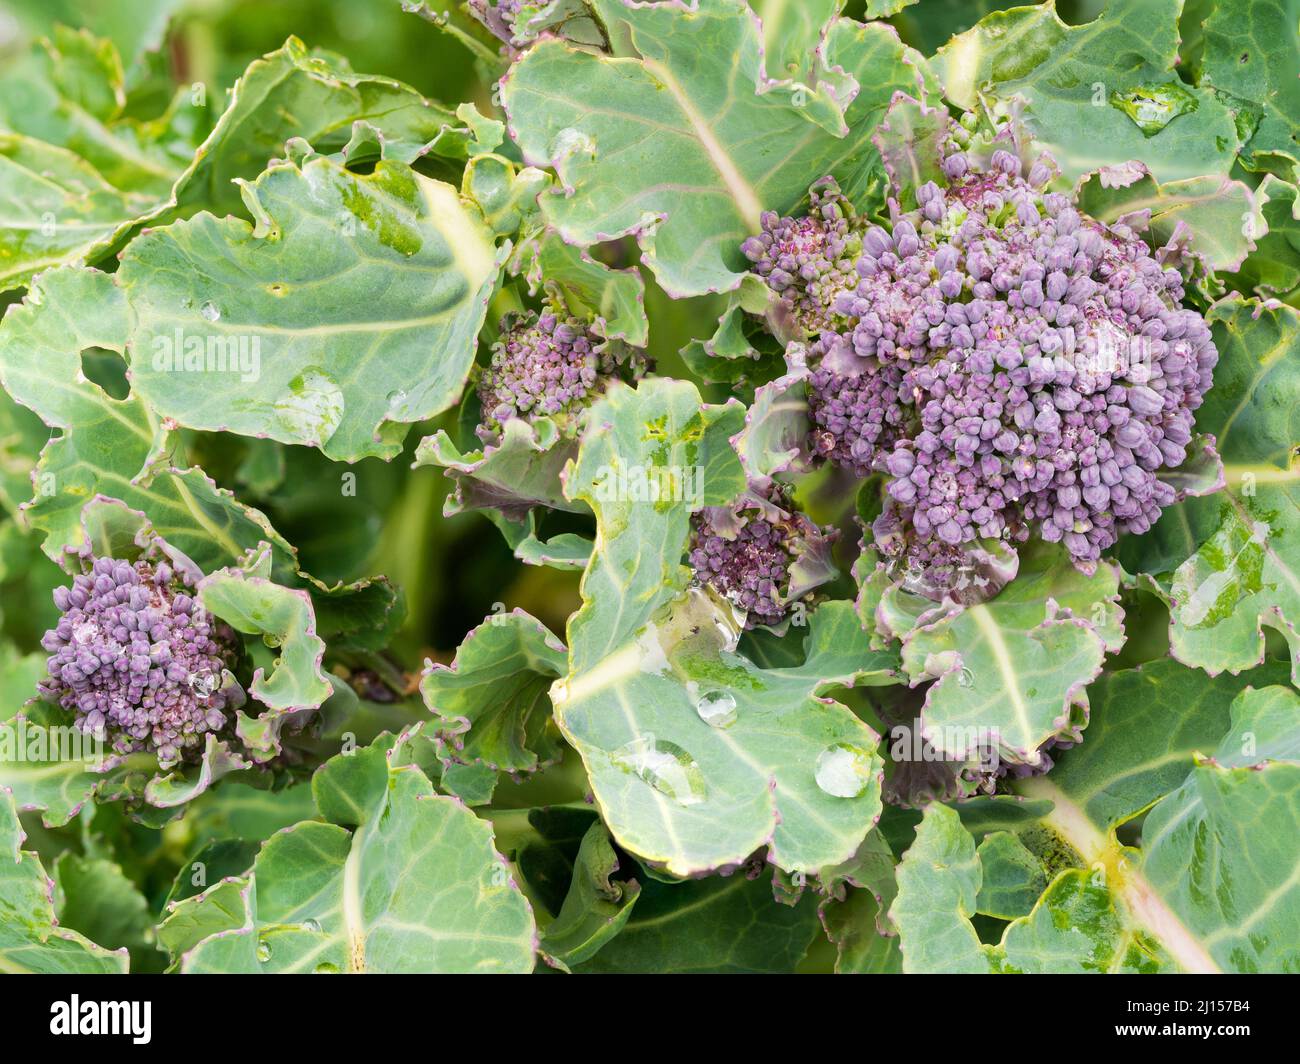 Edible buds and stems of the cold hardy early spring vegetable, Purple sprouting broccoli, Brassica oleracea var. italica Stock Photo